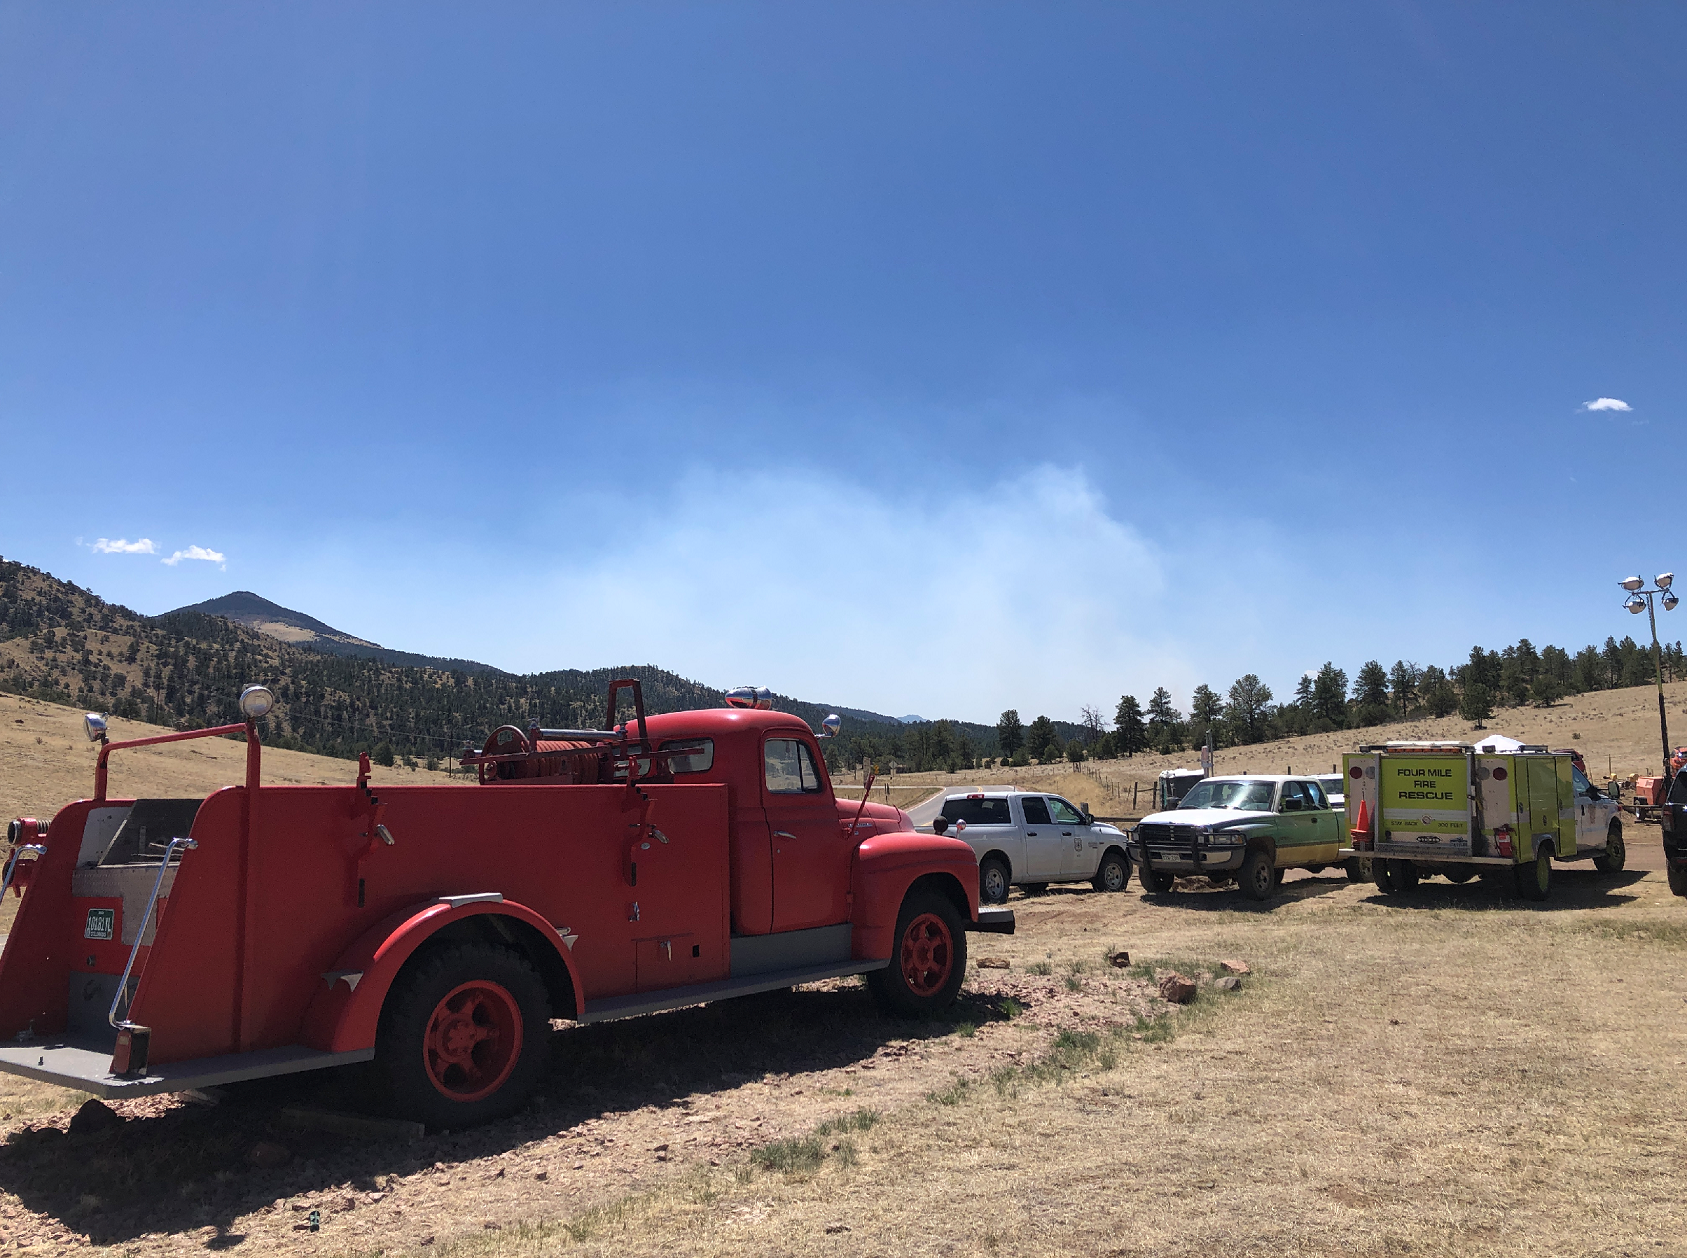 light smoke rises over the horizon from the south end of High Park Fire. An old firetruck is in the foreground, and modern vehicles in the lot.